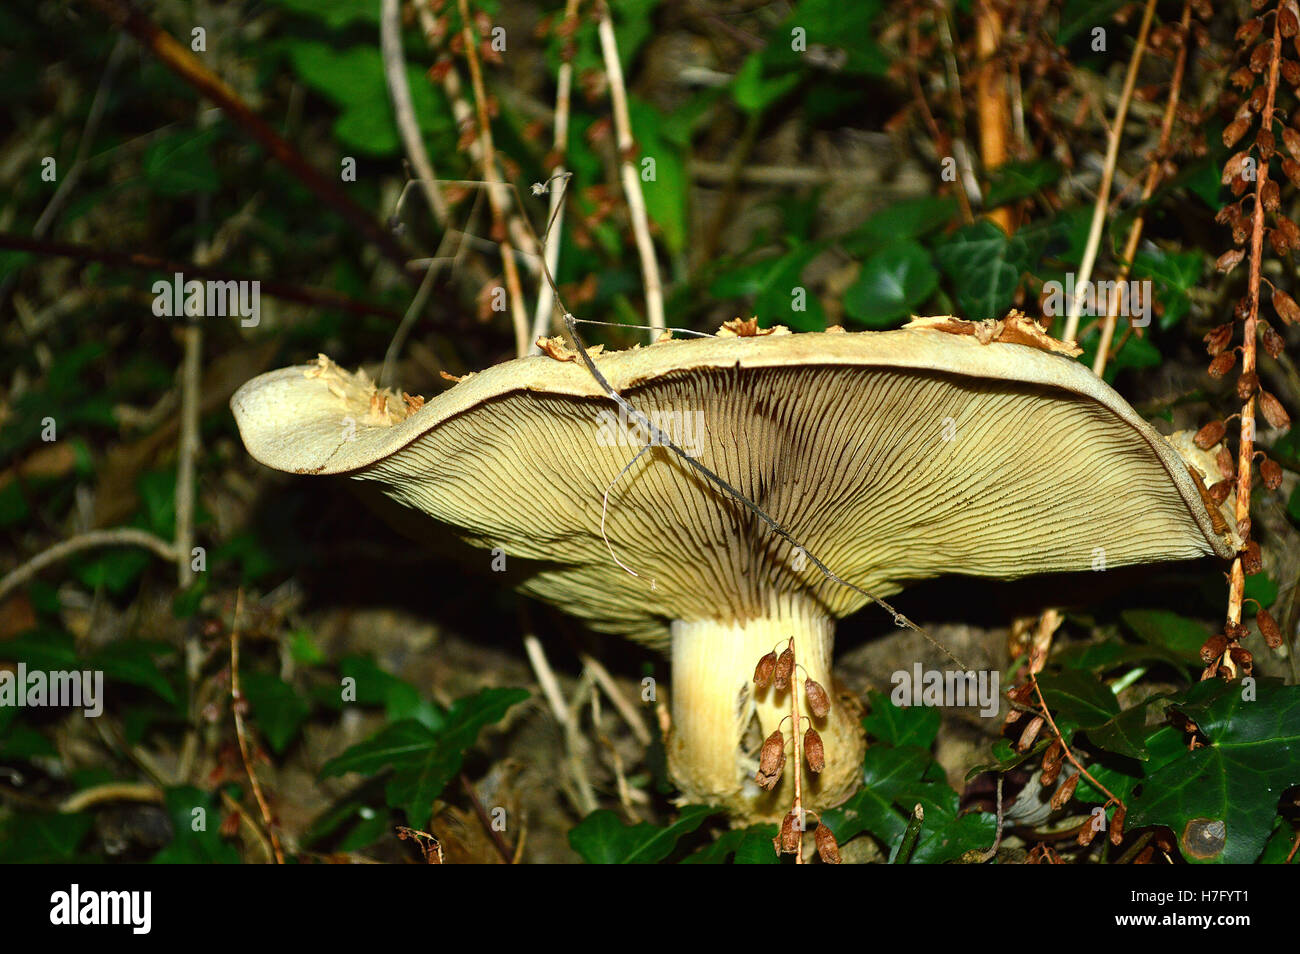 Large white toadstool, showing ribbed underside, about 6 inches across (15cm) not a mushroom, so probably poisonous Stock Photo